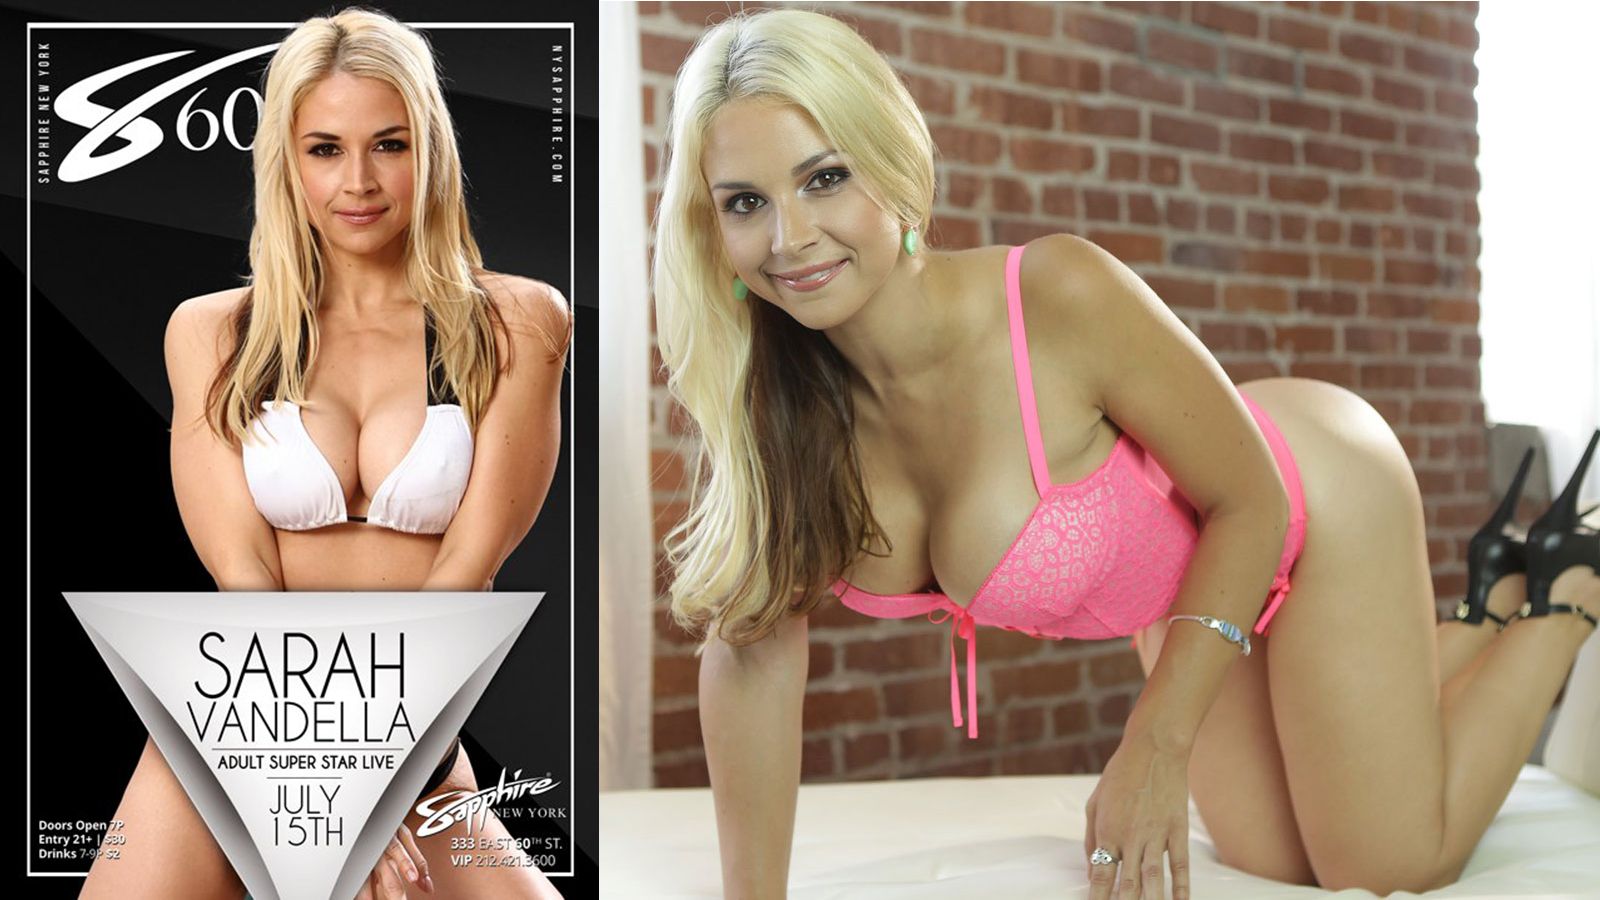 Sarah Vandella To Feature At Top NYC Club Sapphire